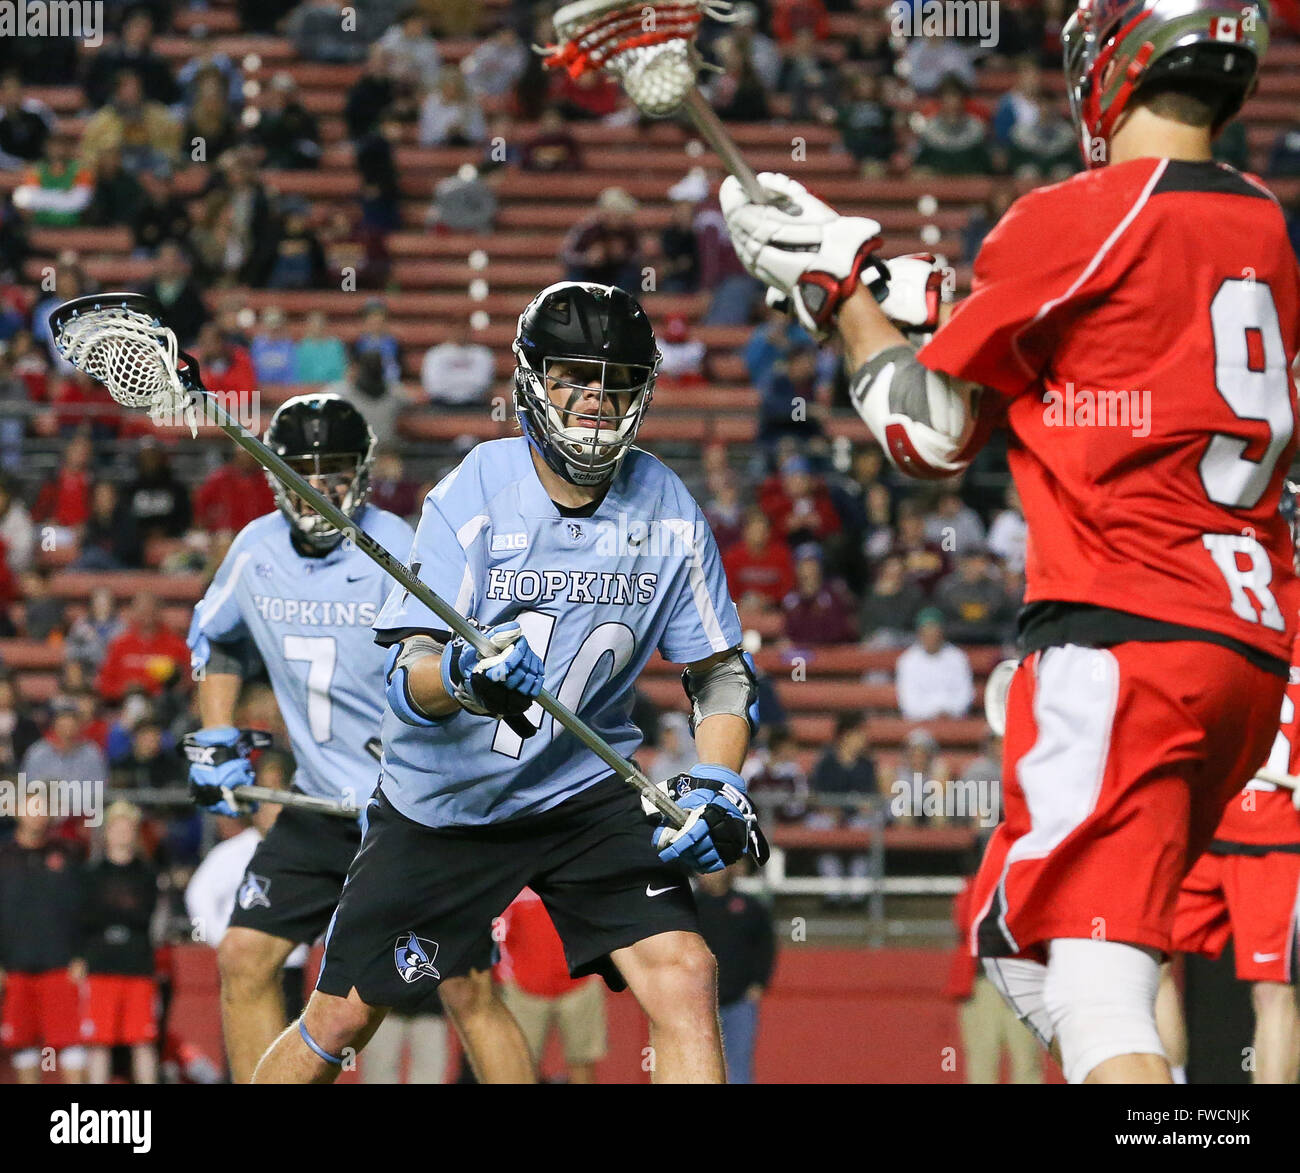 Piscataway, NJ, USA. 2nd Apr, 2016. Johns Hopkins Jack Olson (10) eyes the ball during an NCAA Lacrosse game between the Johns Hopkins Blue Jays and the Rutgers Scarlet Knights at High Point Solutions Stadium in Piscataway, NJ. Rutgers defeated Johns Hopkins, 16-9. Mike Langish/Cal Sport Media. © csm/Alamy Live News Stock Photo